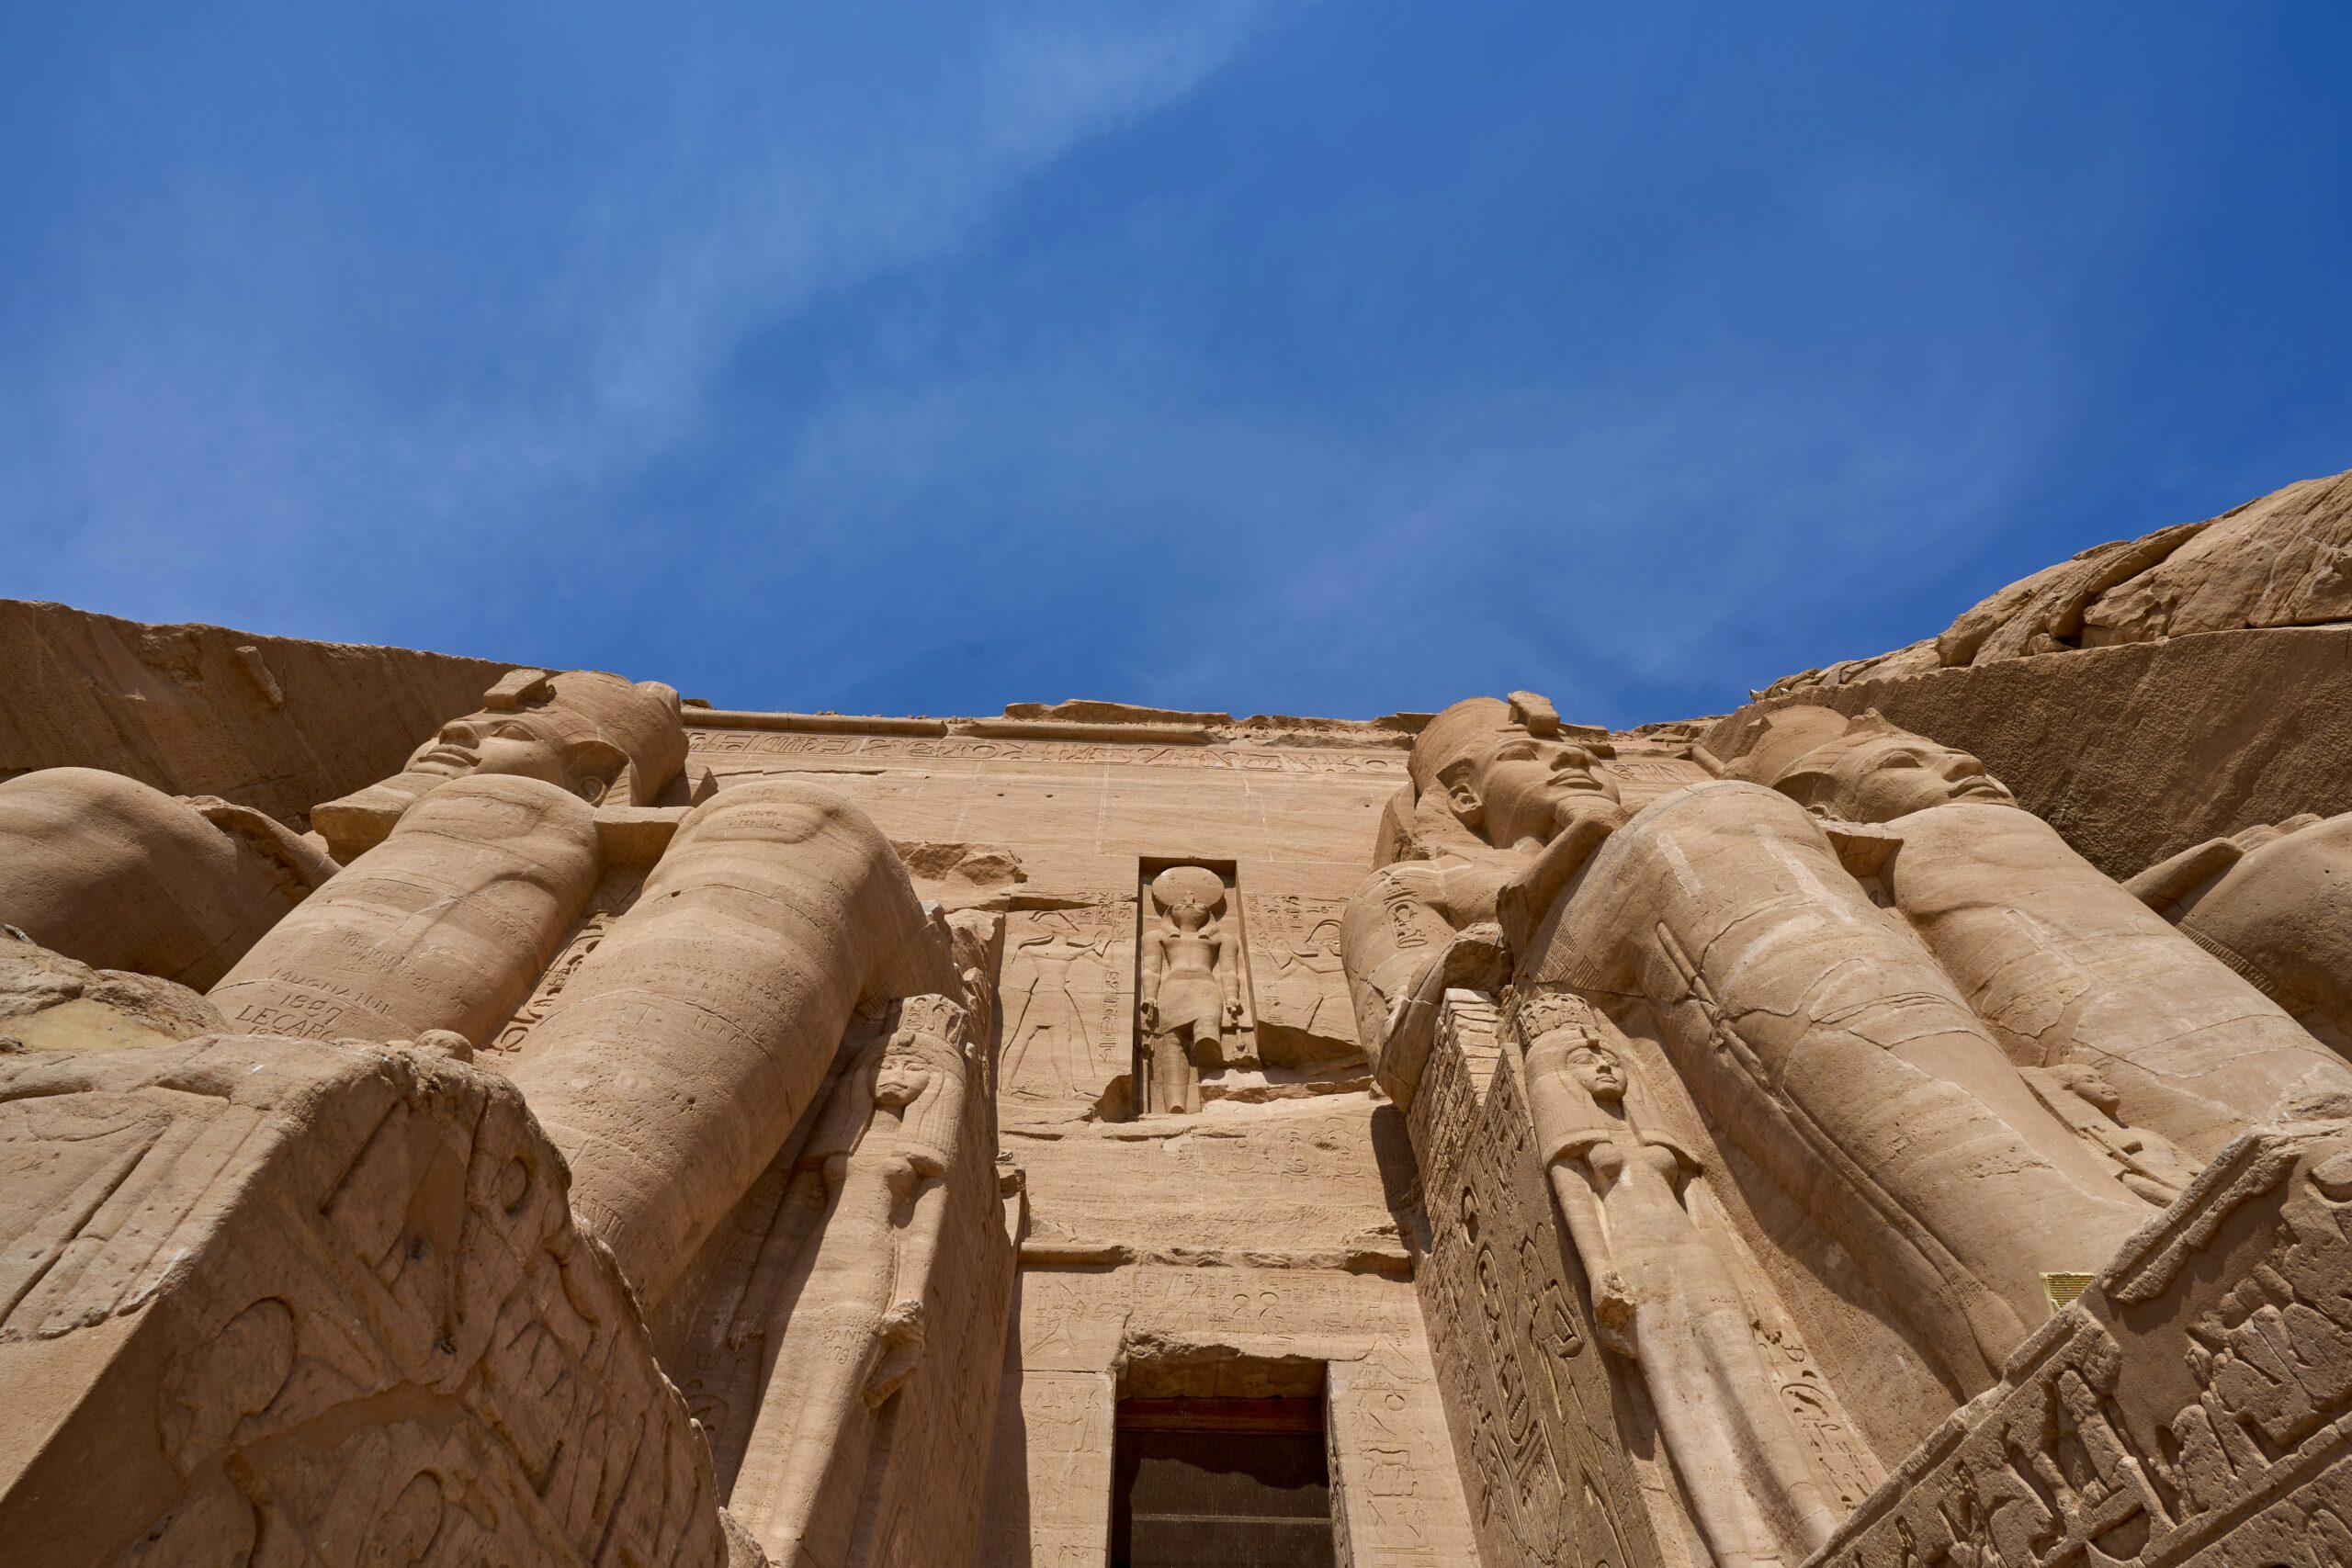 This festival is an interesting thing for travelers to witness. 
Pictured: the Temple of Ramses II